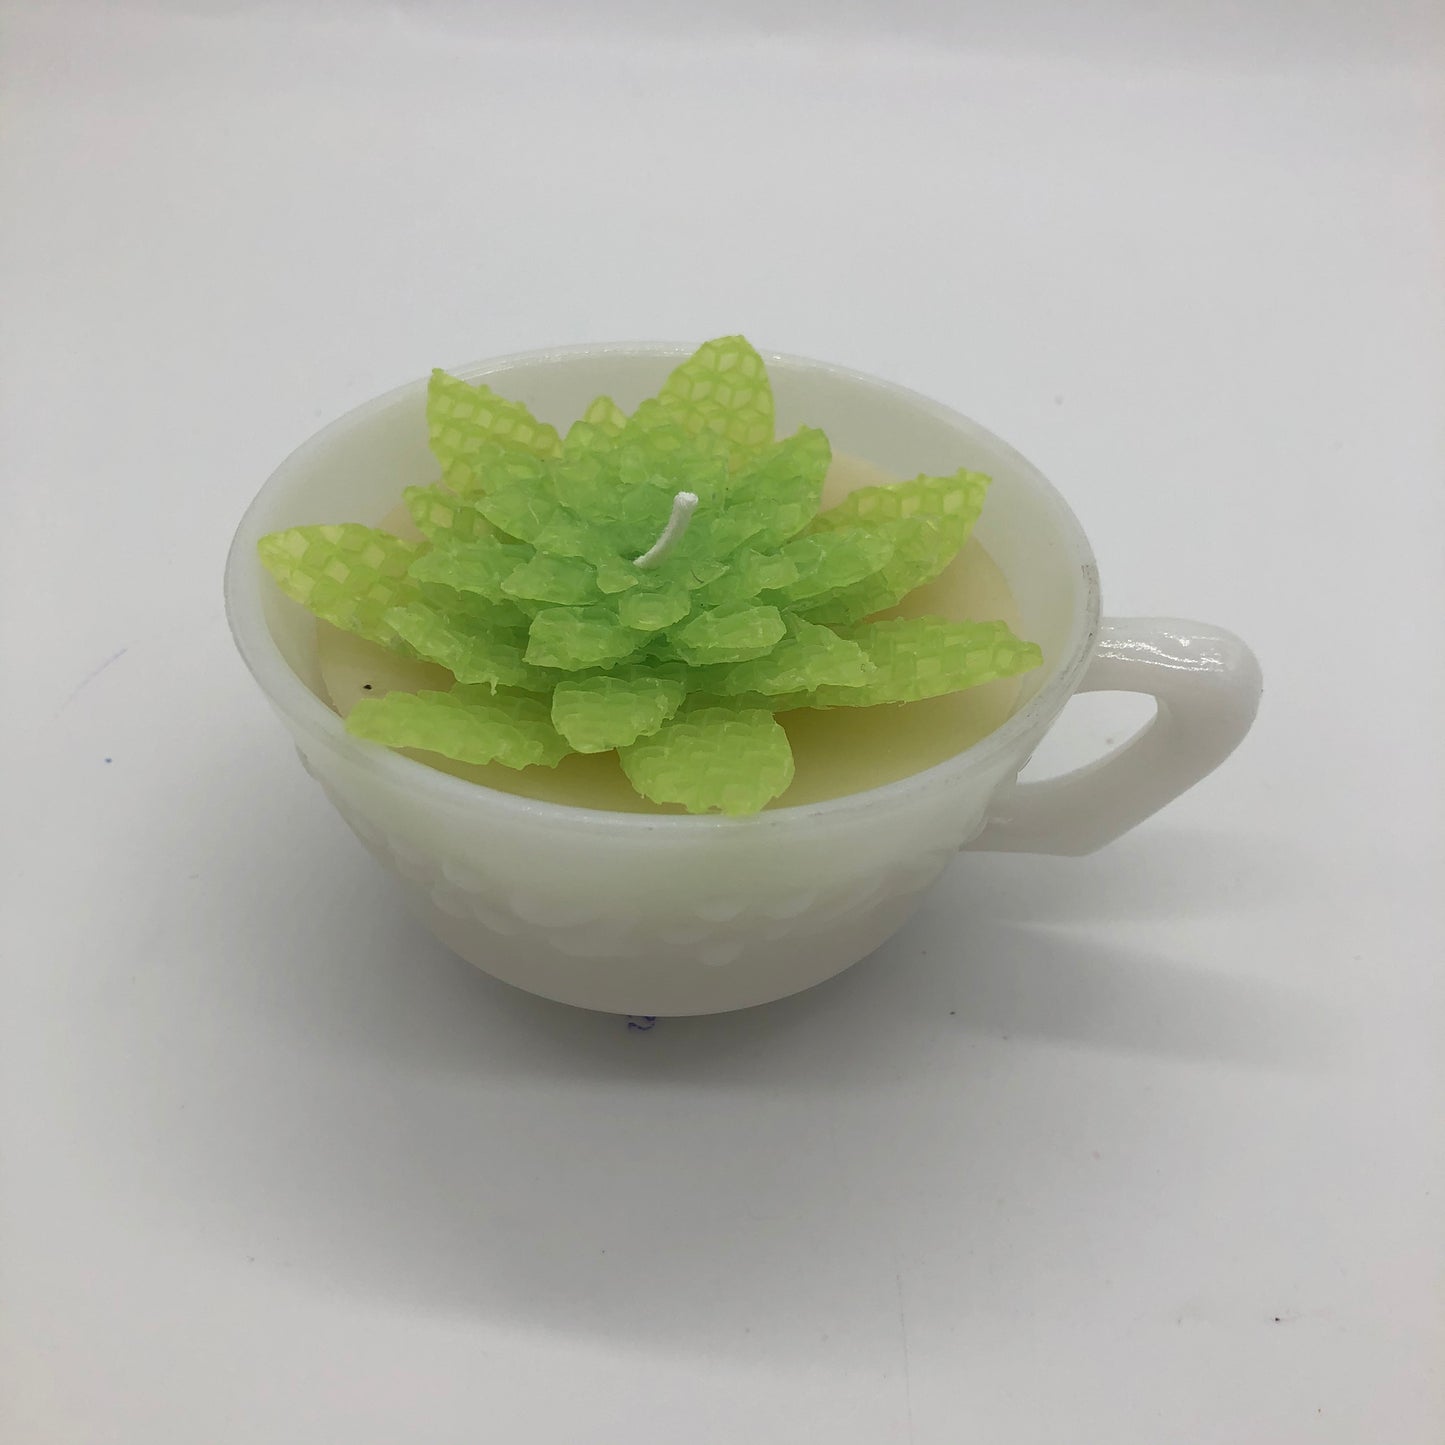 Milk glass teacup with light yellow candle and light green beeswax sheet succulent on top.